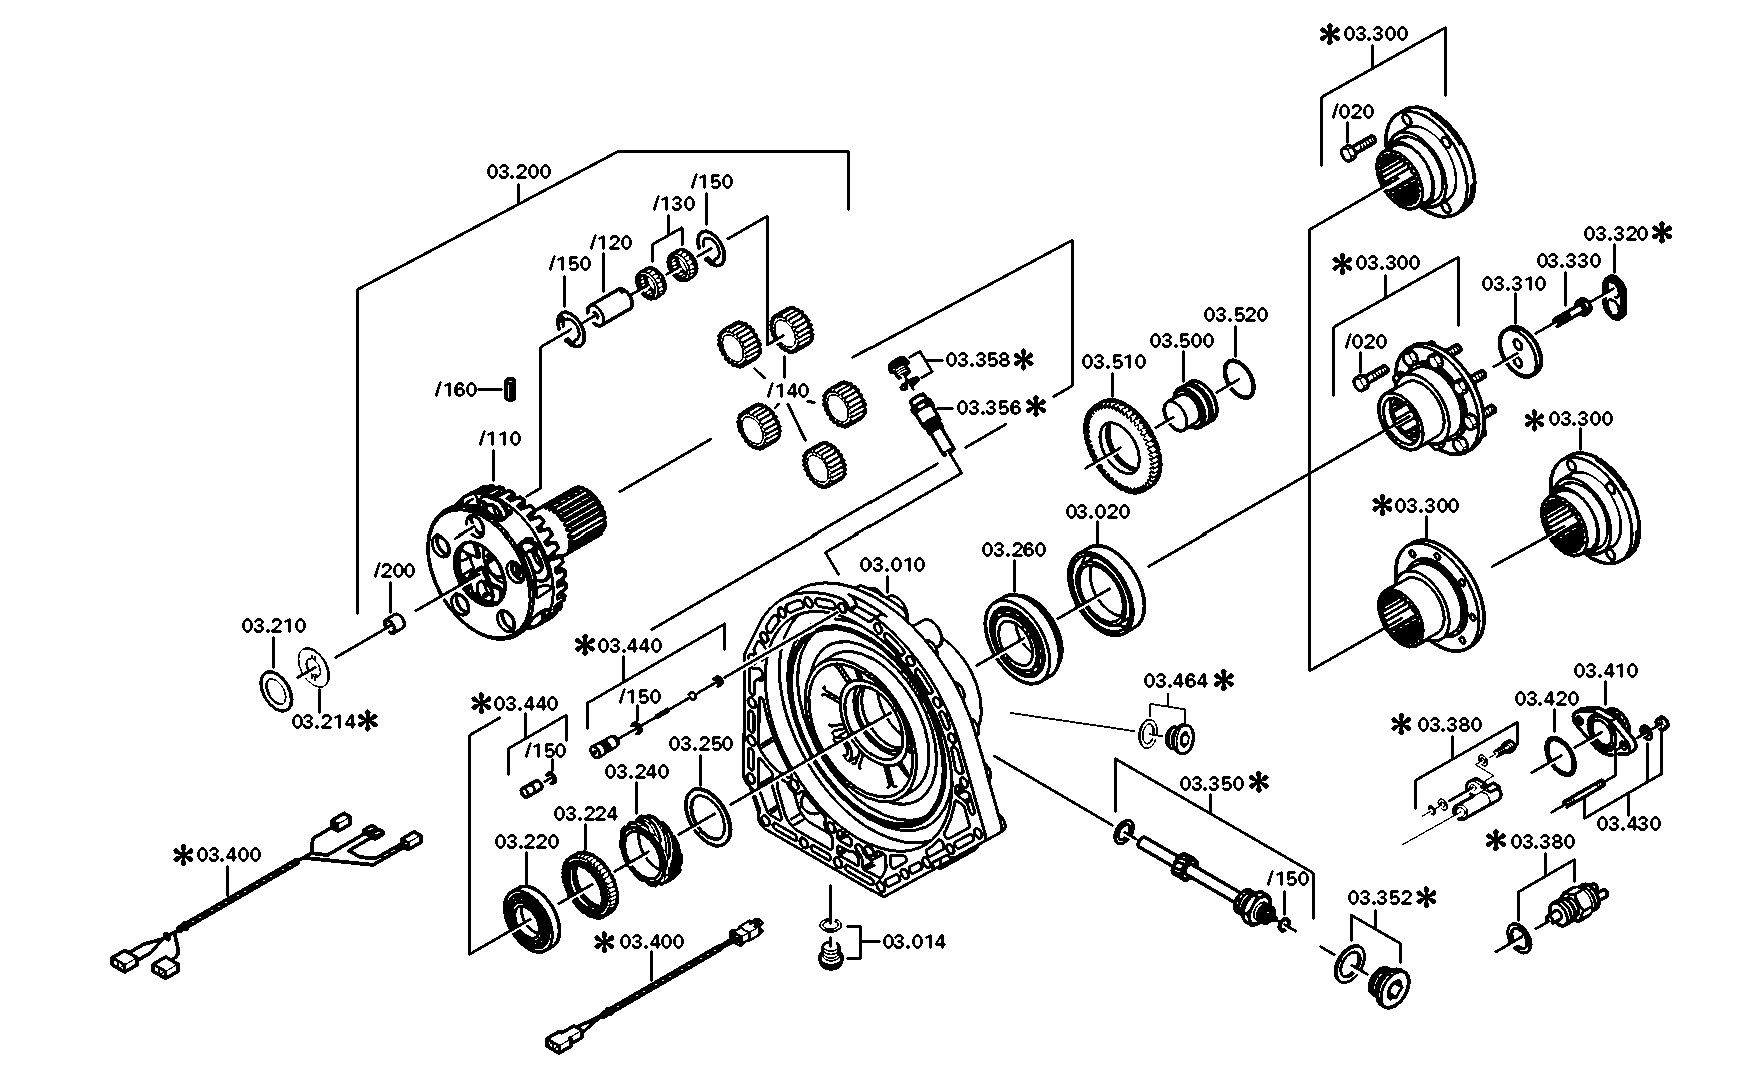 drawing for MOXY TRUCKS AS 252622 - AXIAL WASHER (figure 1)